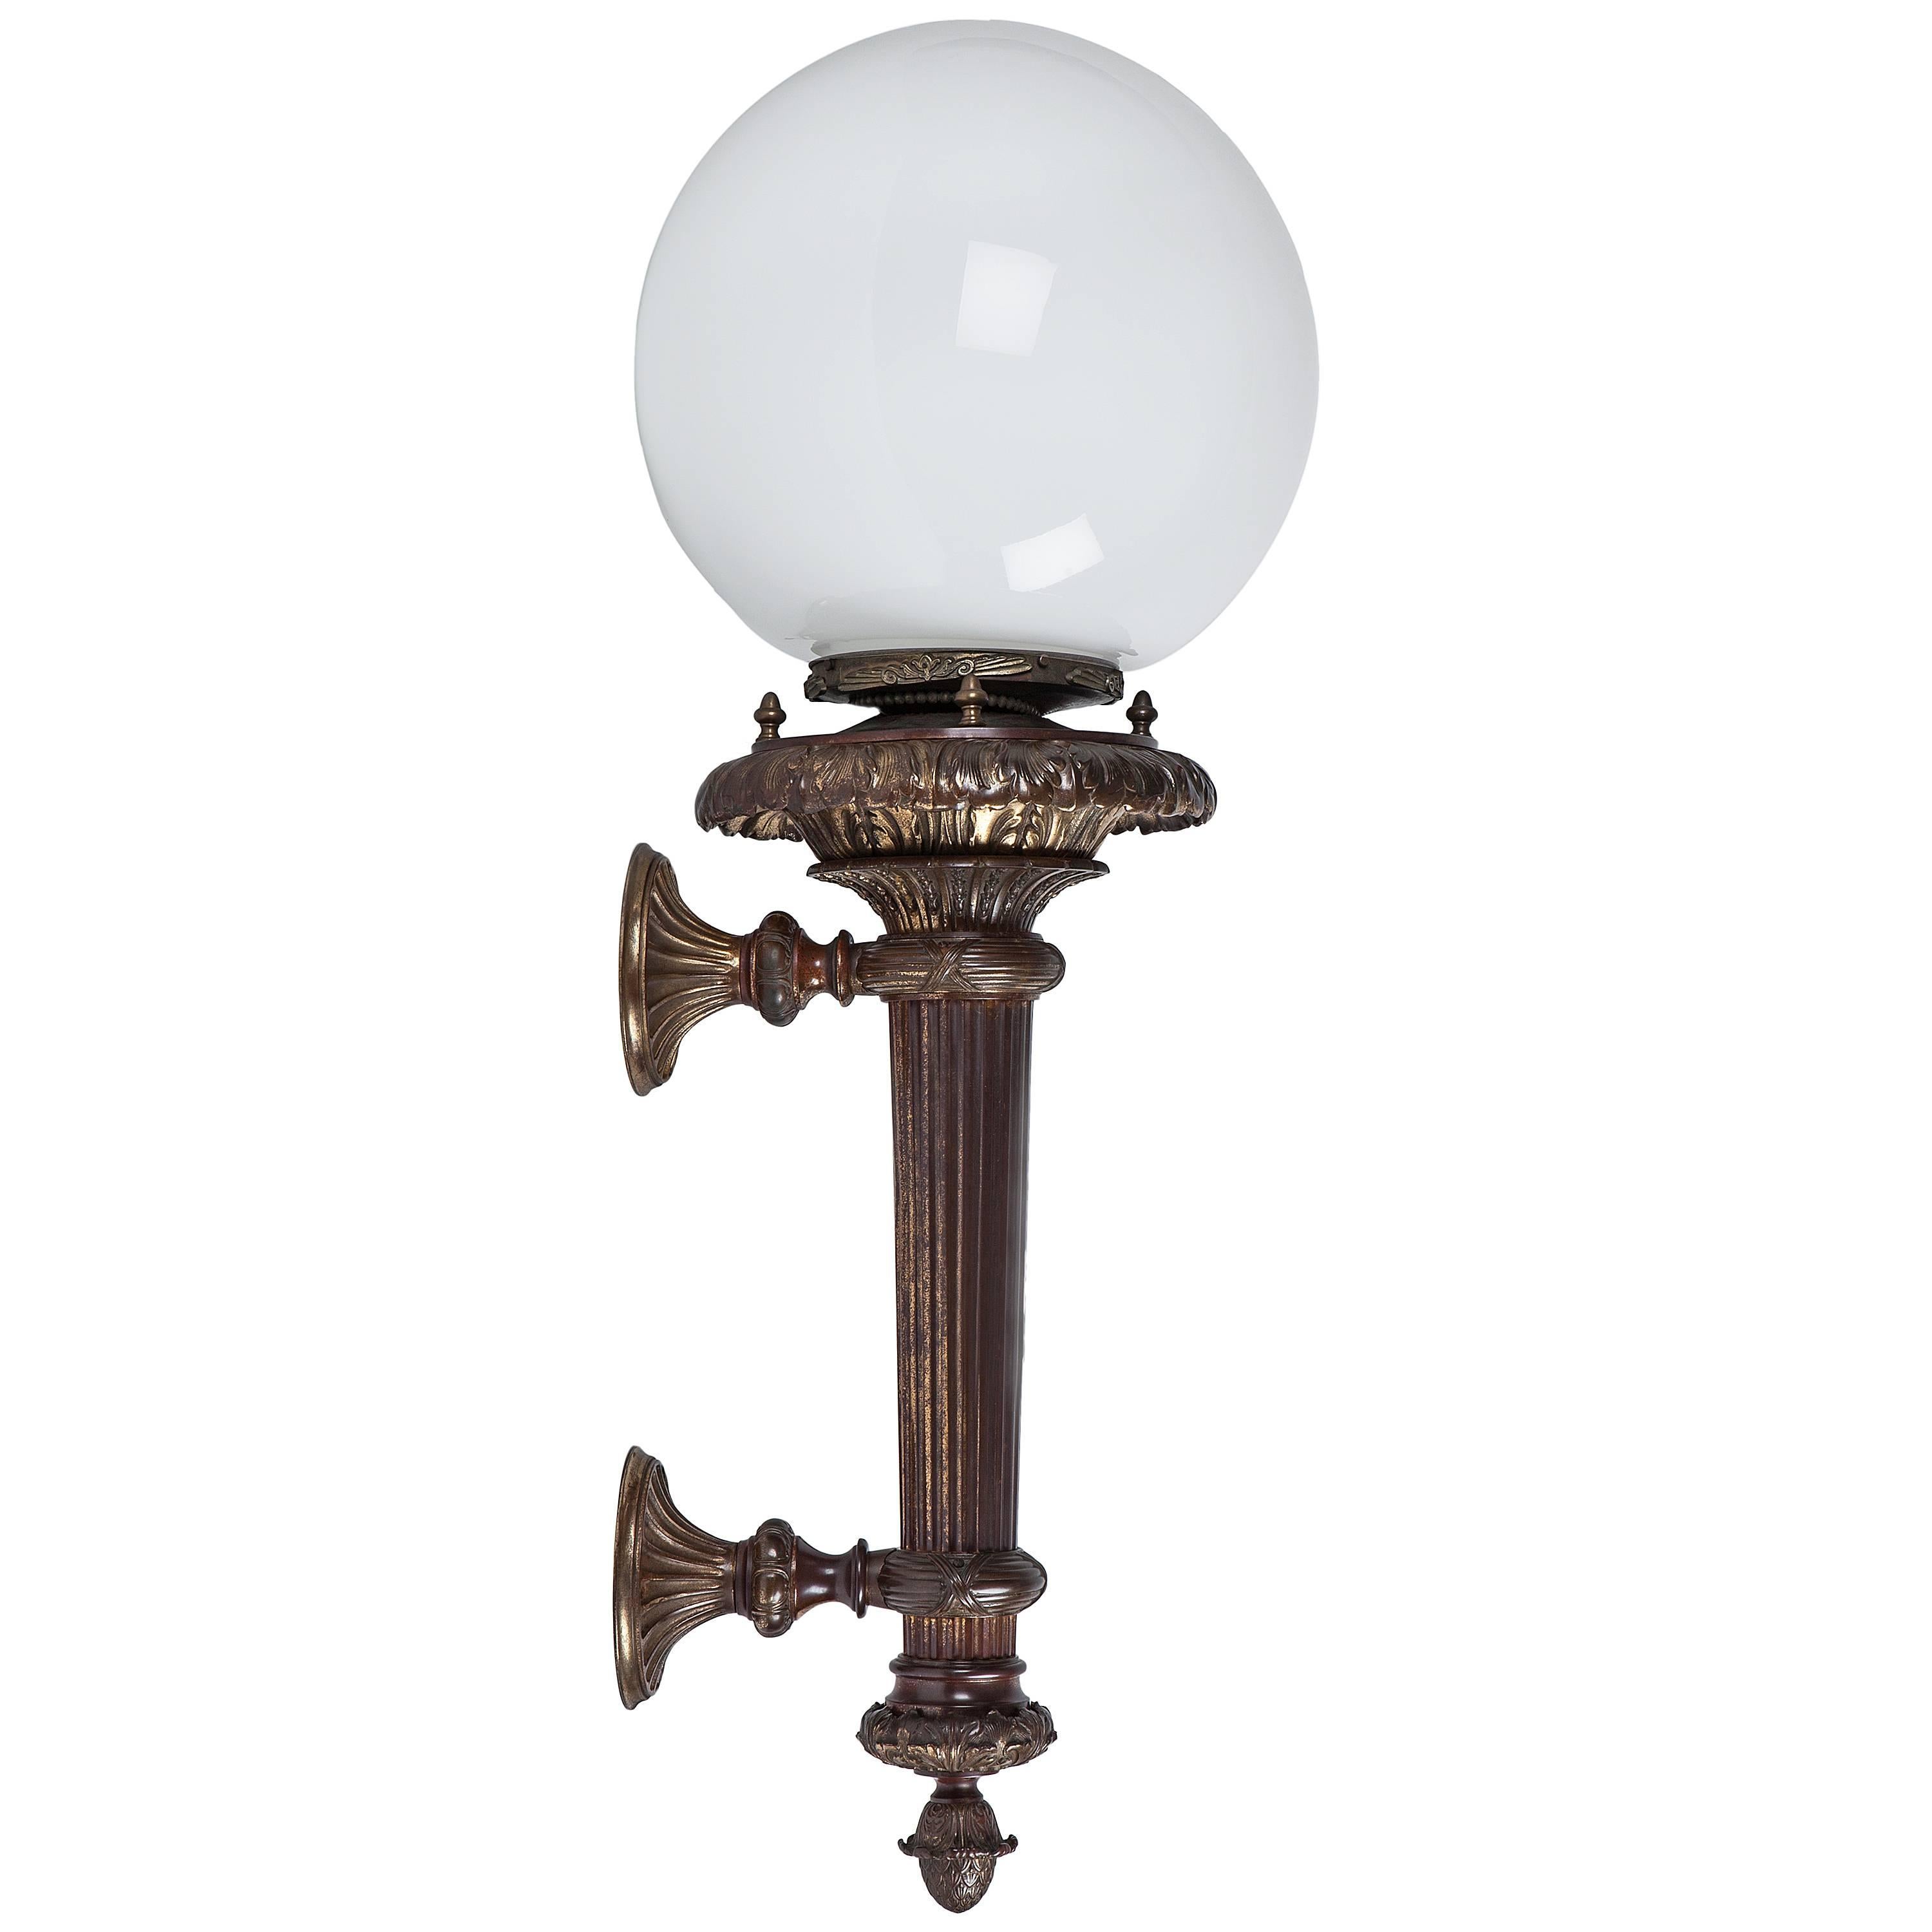 Cast Bronze Empire Style Wall Sconces with Opal White Glass Globes, Circa 1900s For Sale